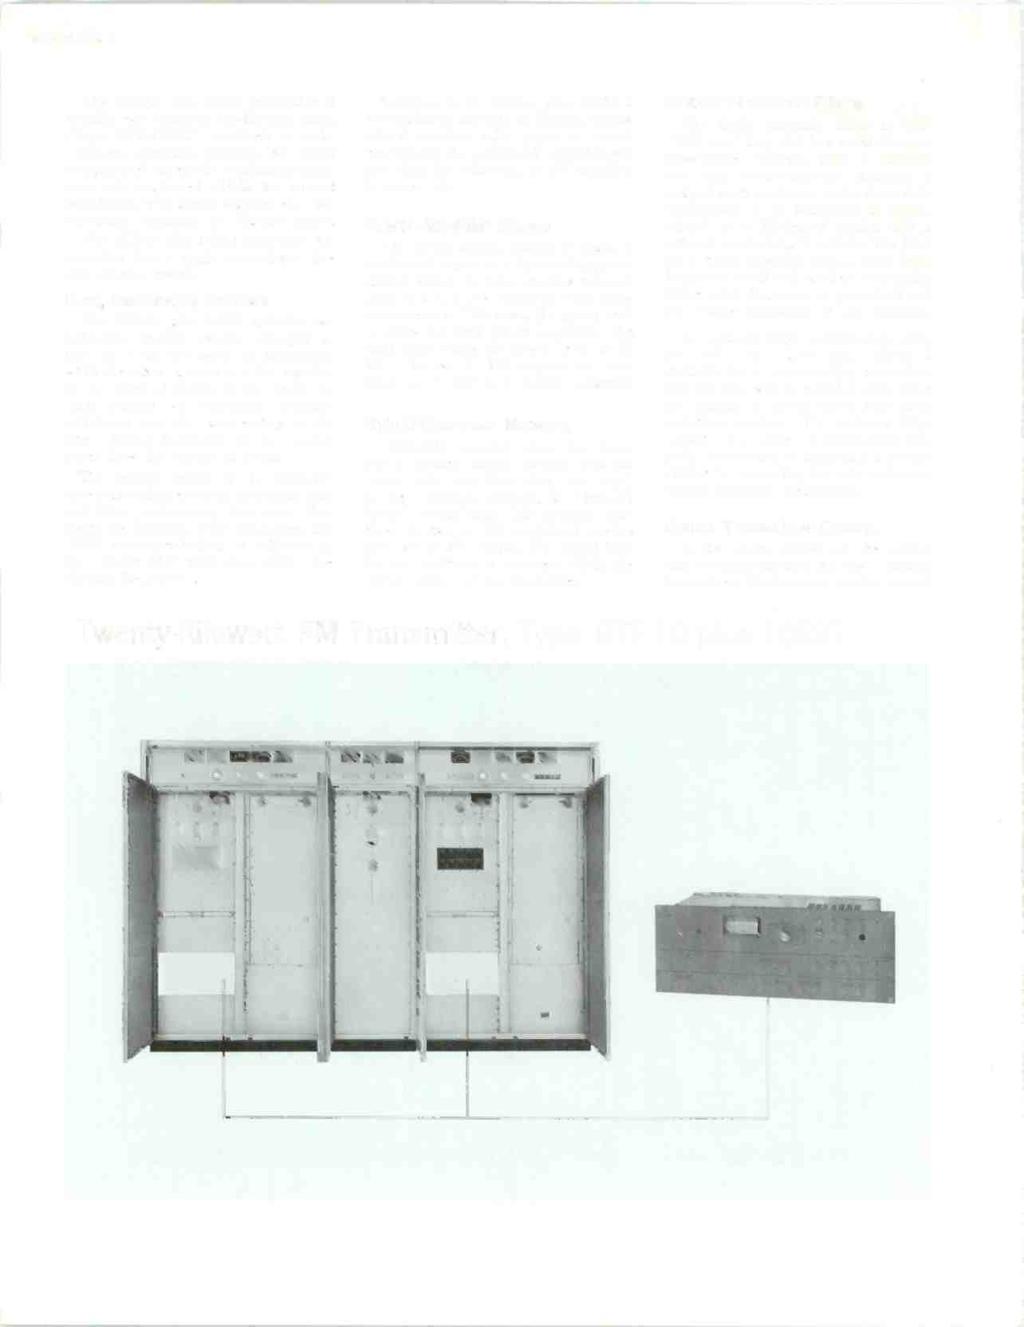 RA.2055 Page 2 The BTF-10 plus 1OES1 transmitter is actually two complete ten -kilowatt units, (Type BTF-10ES1) combined to make continous operation practical.